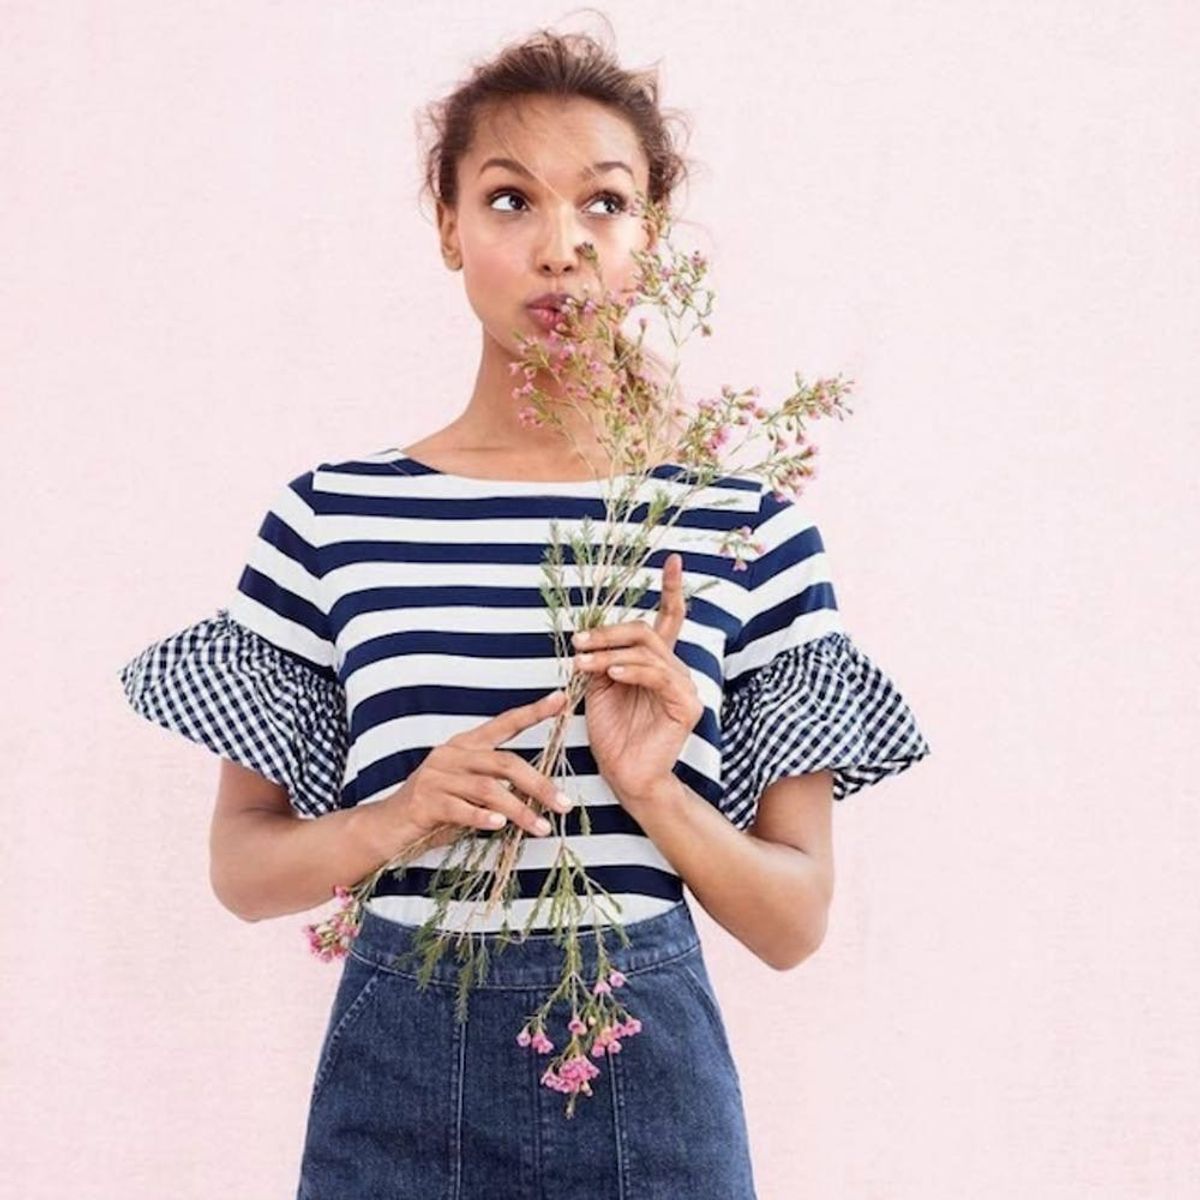 J.Crew Just Invented Its Own Holiday to Celebrate Stripes